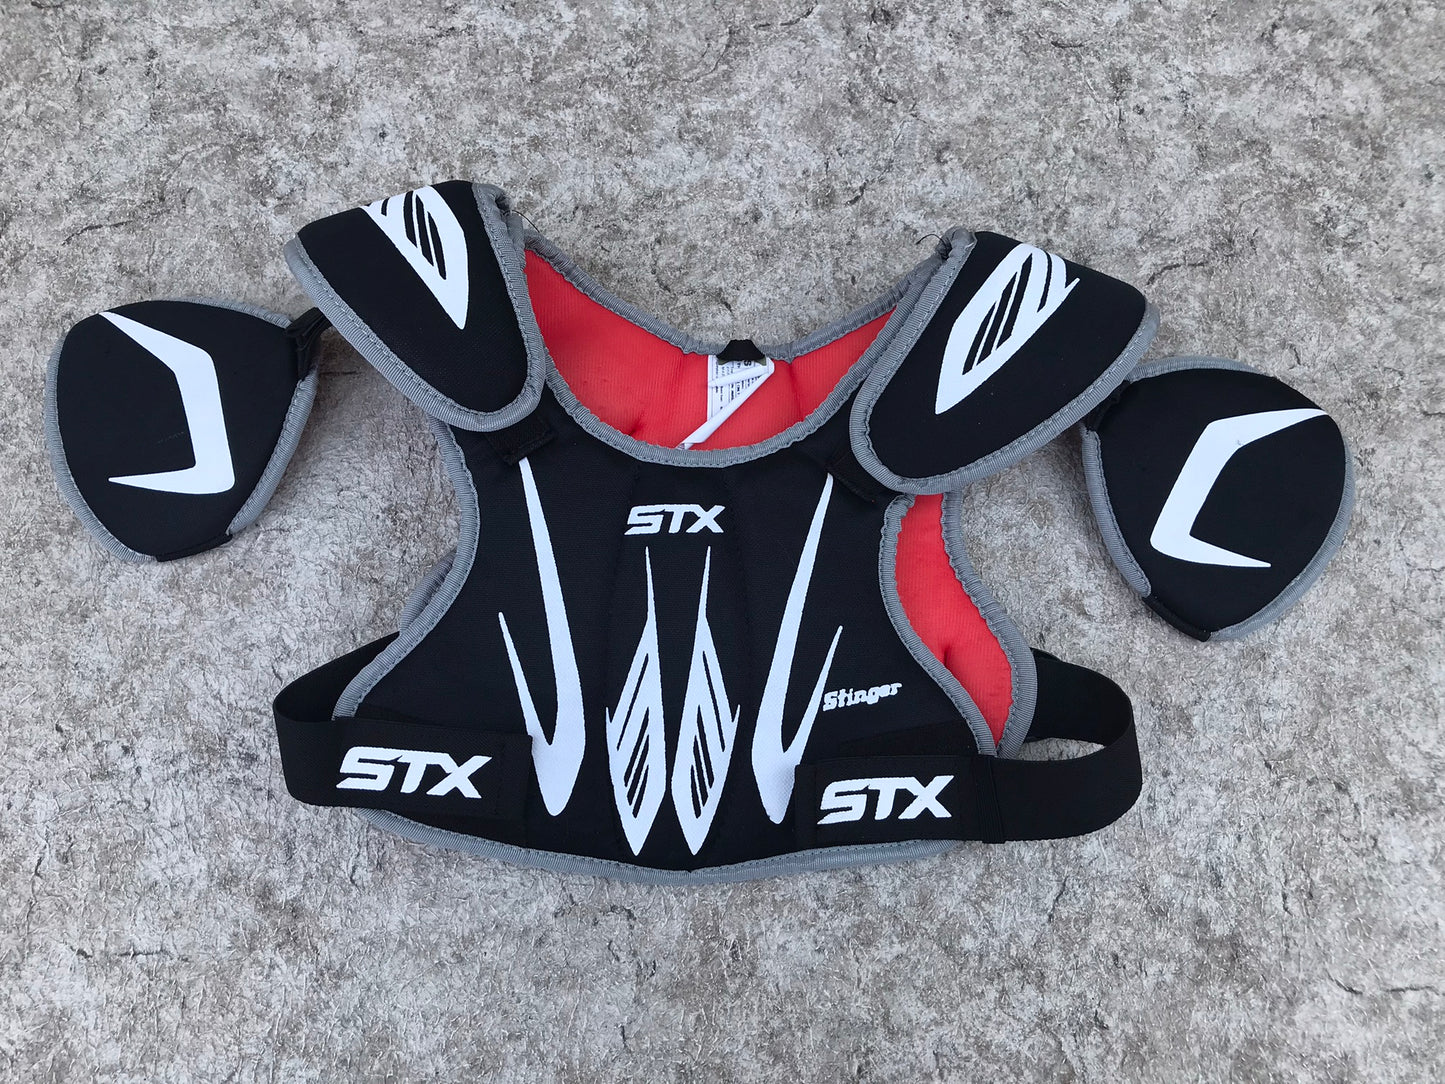 Lacrosse Shoulder Chest Pad Child Size 7-8 STX Black Red As New